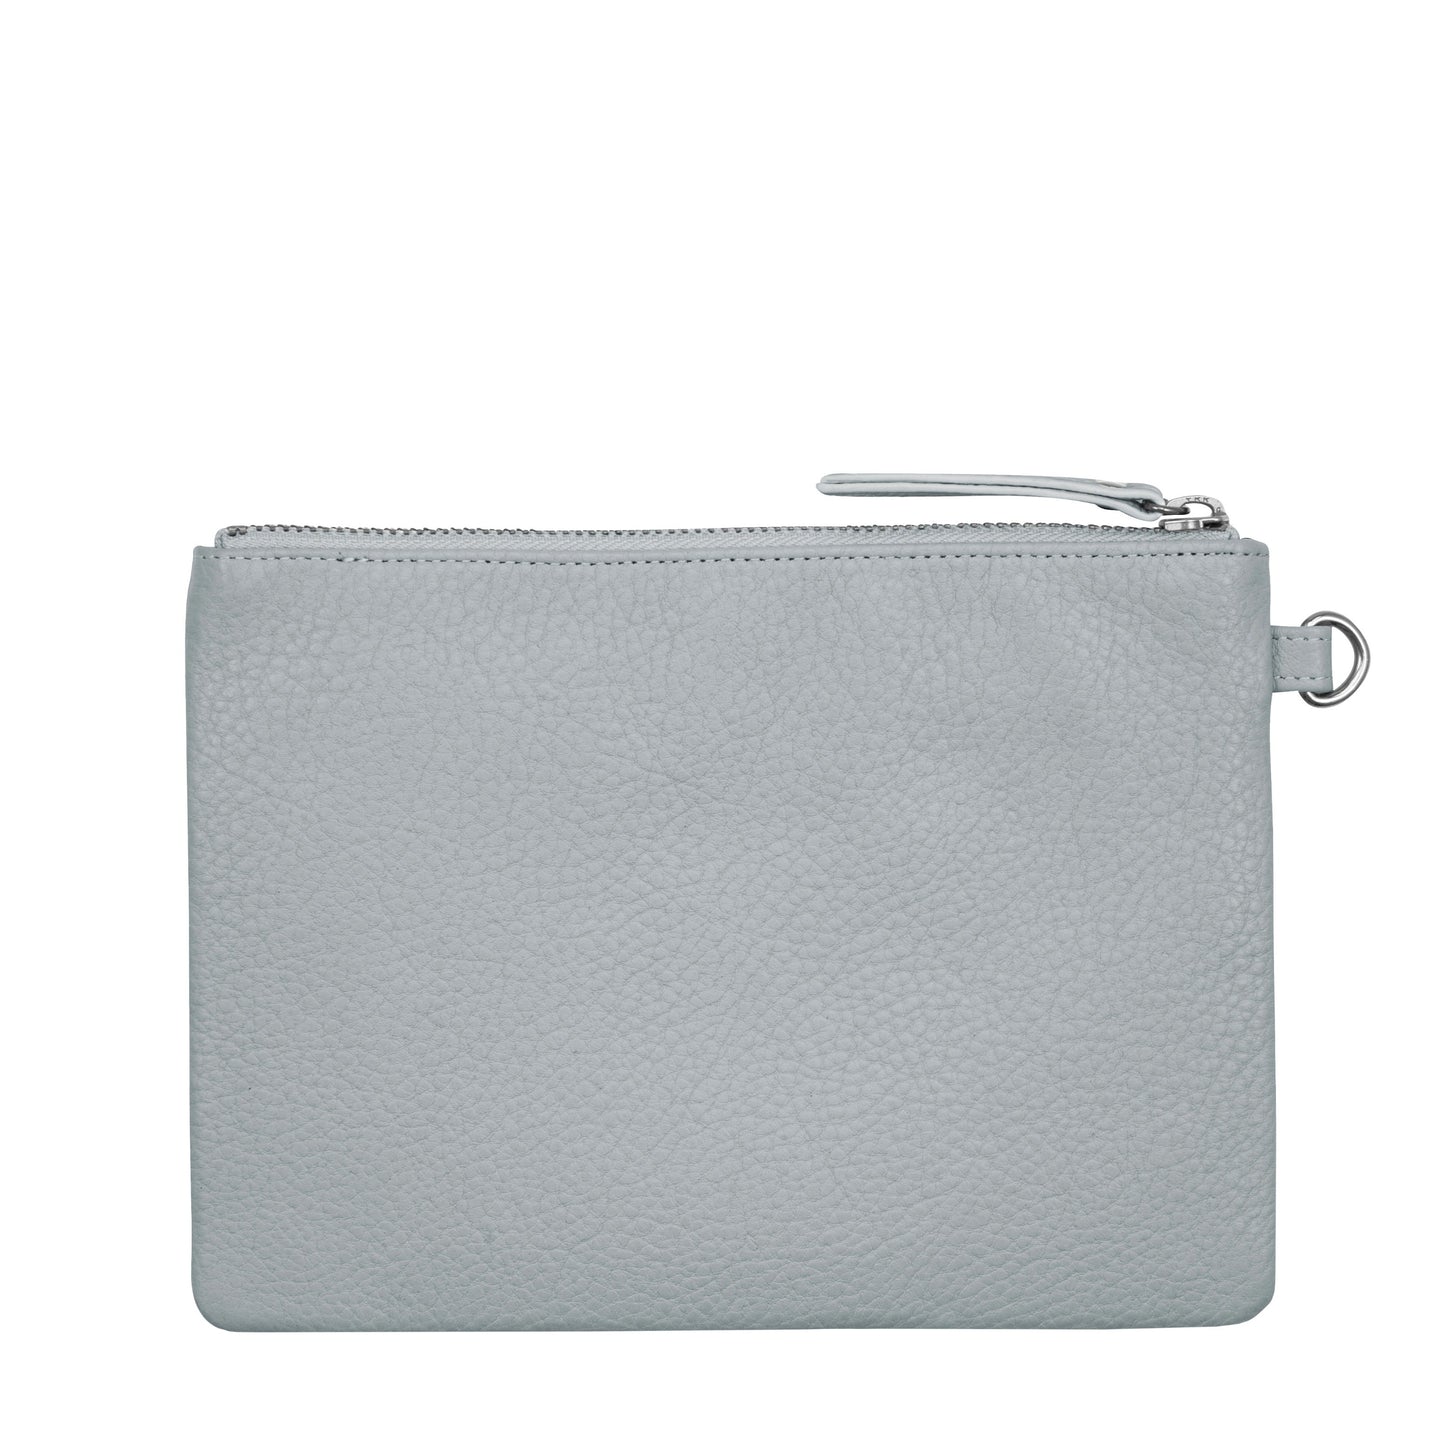 Load image into Gallery viewer, Status Anxiety - Fixation Clutch - Arctic Grey
